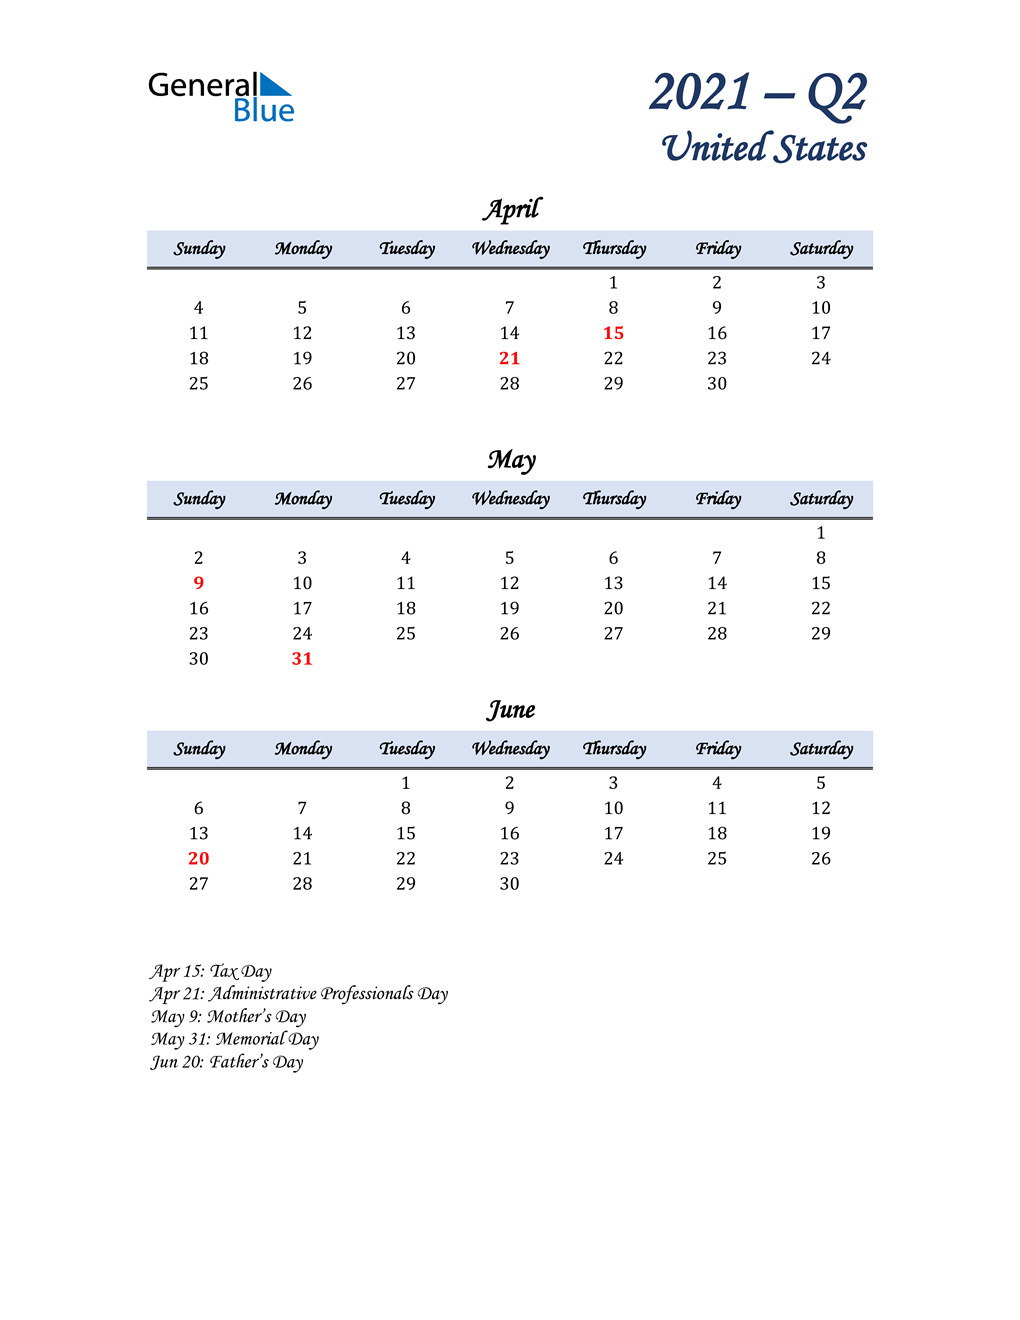  April, May, and June Calendar for United States